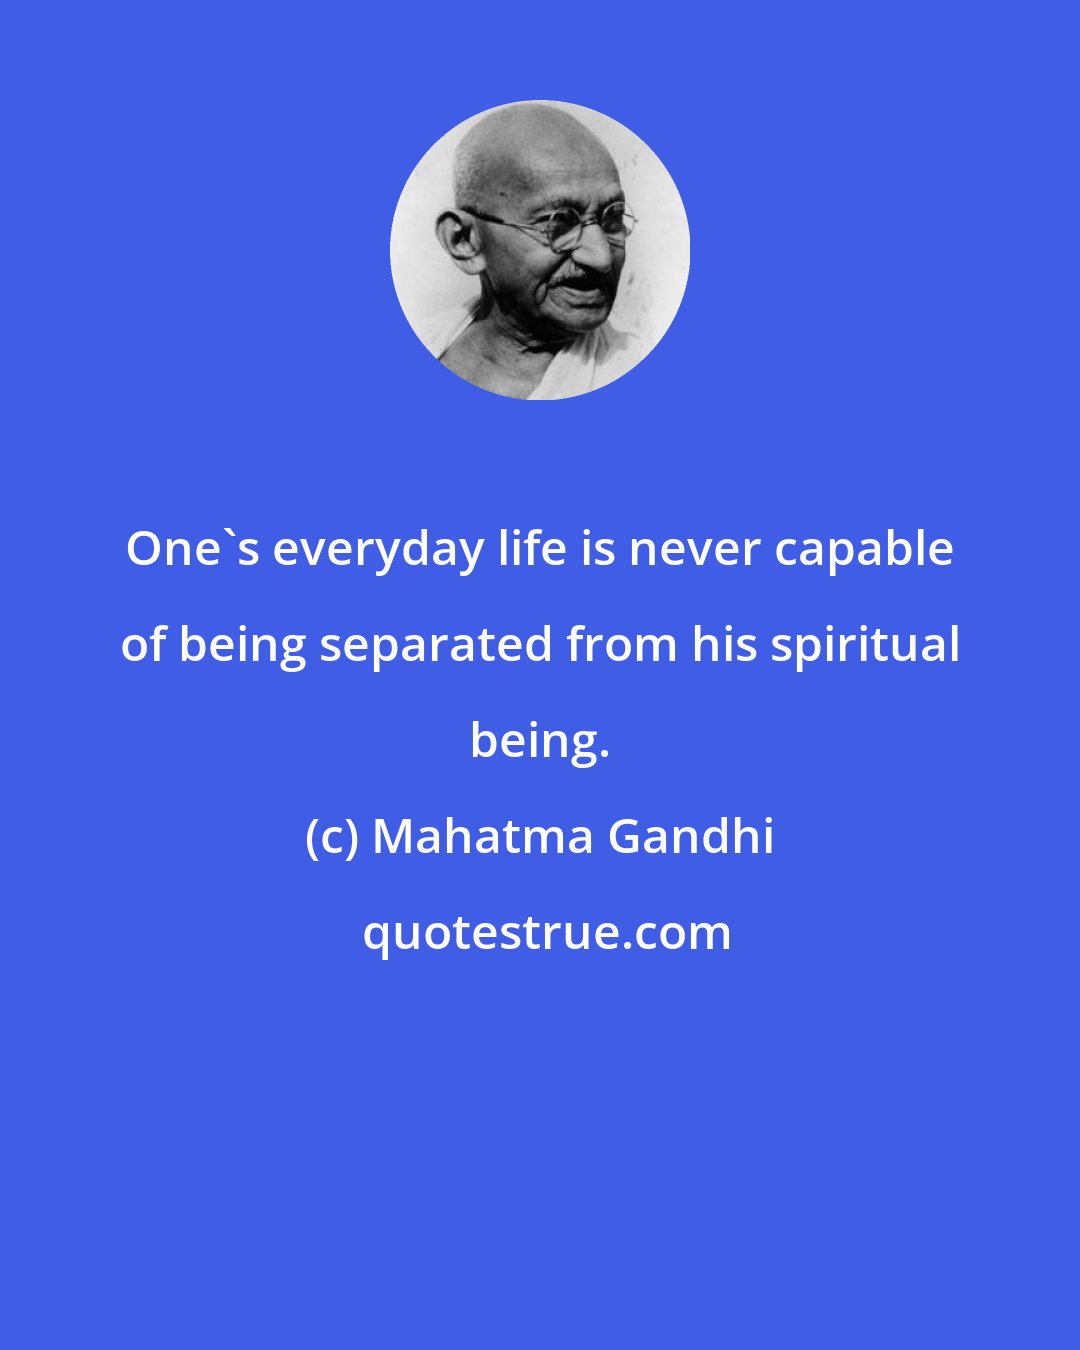 Mahatma Gandhi: One's everyday life is never capable of being separated from his spiritual being.